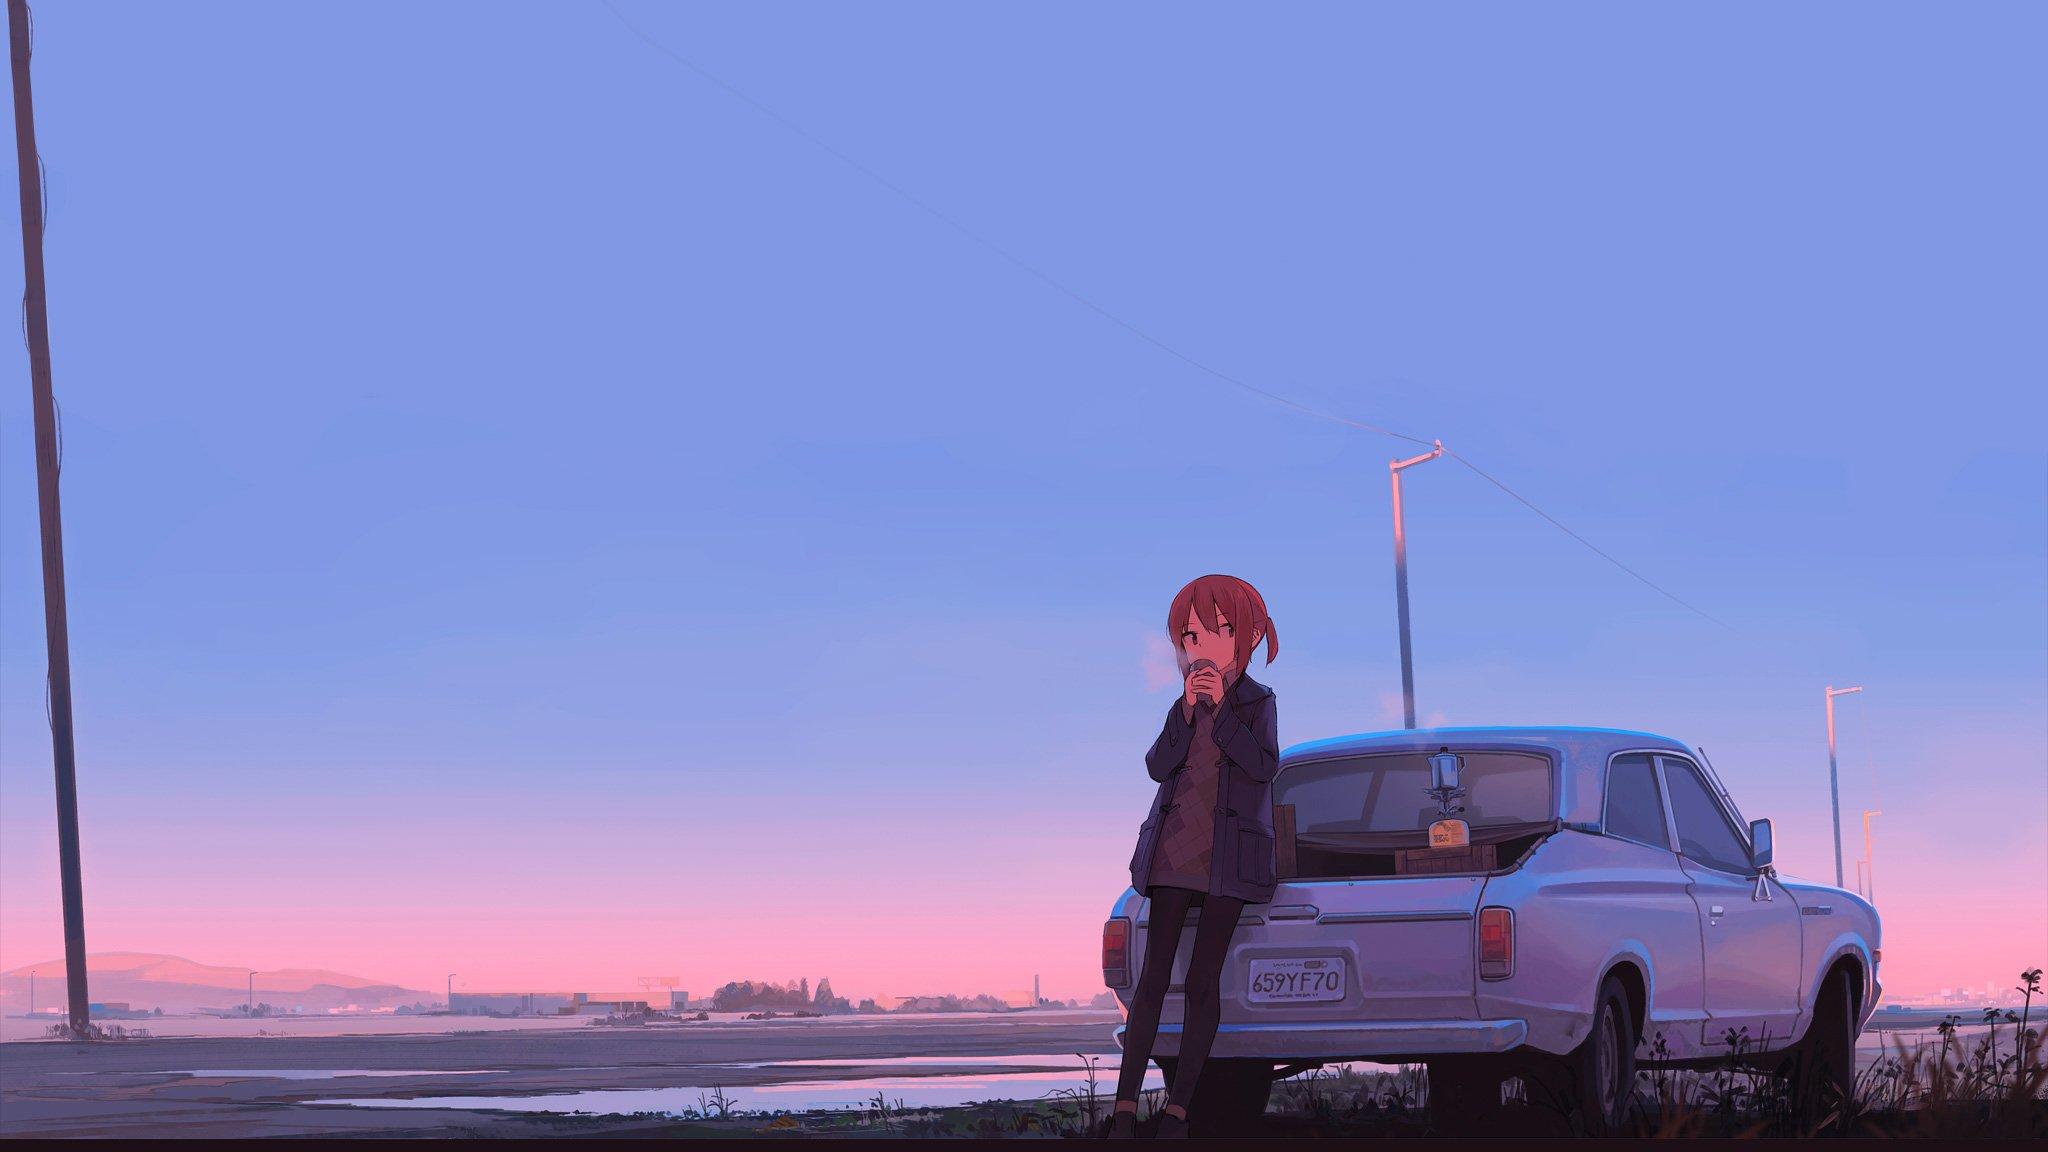 Is There An Anime Manga Which This Wallpaper Anime Girl Car